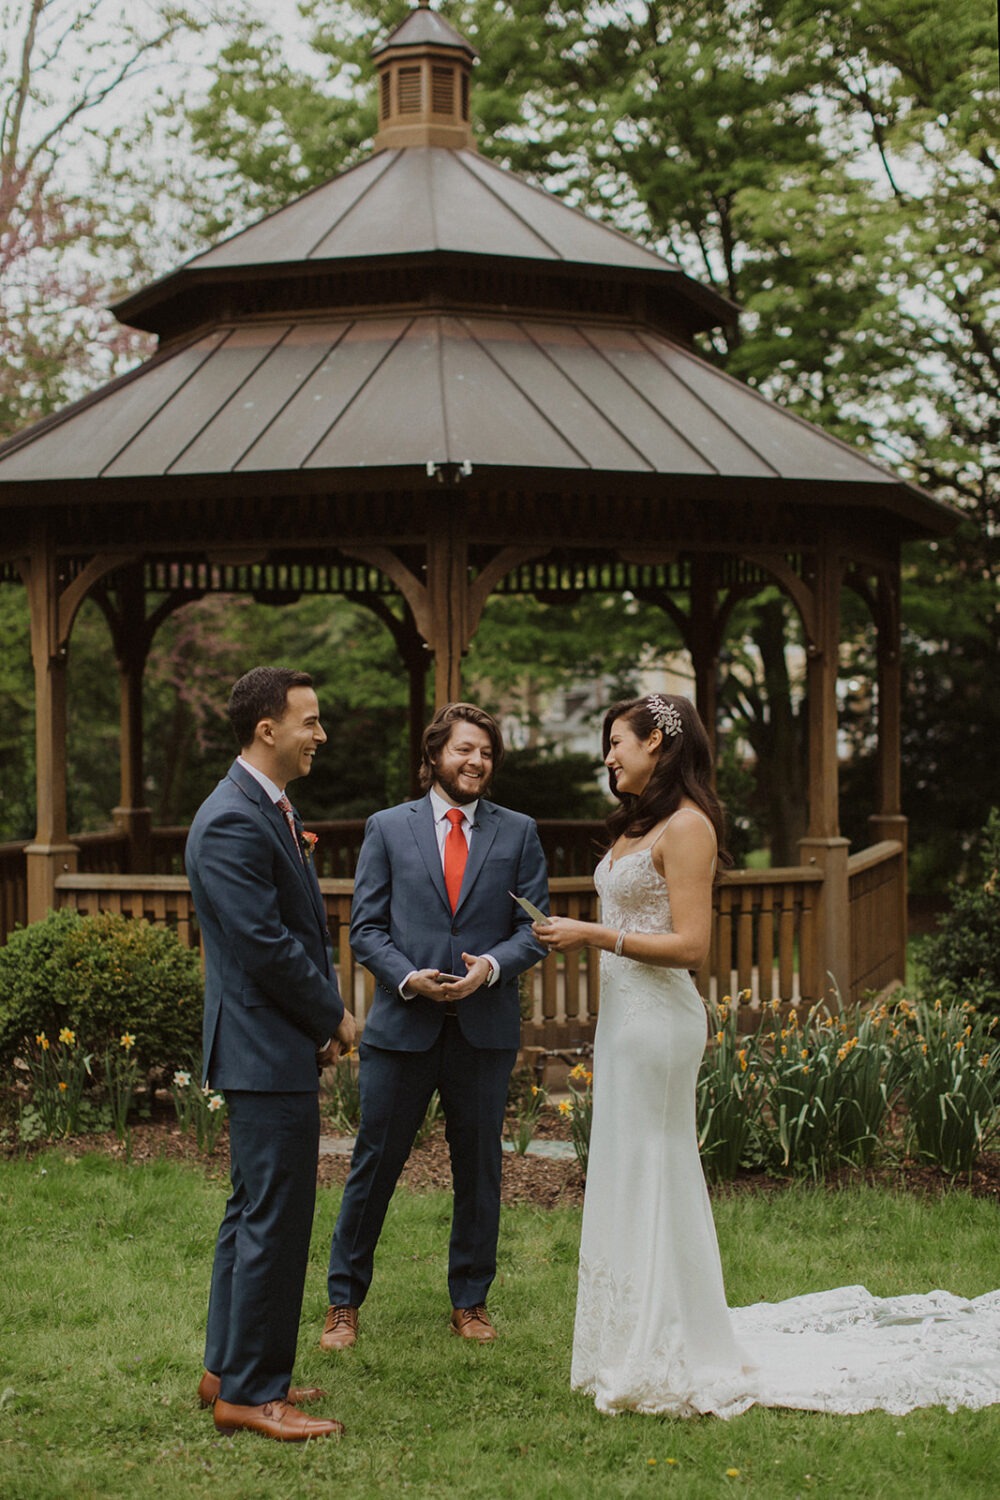 couple exchanges vows in park outside of gazebo